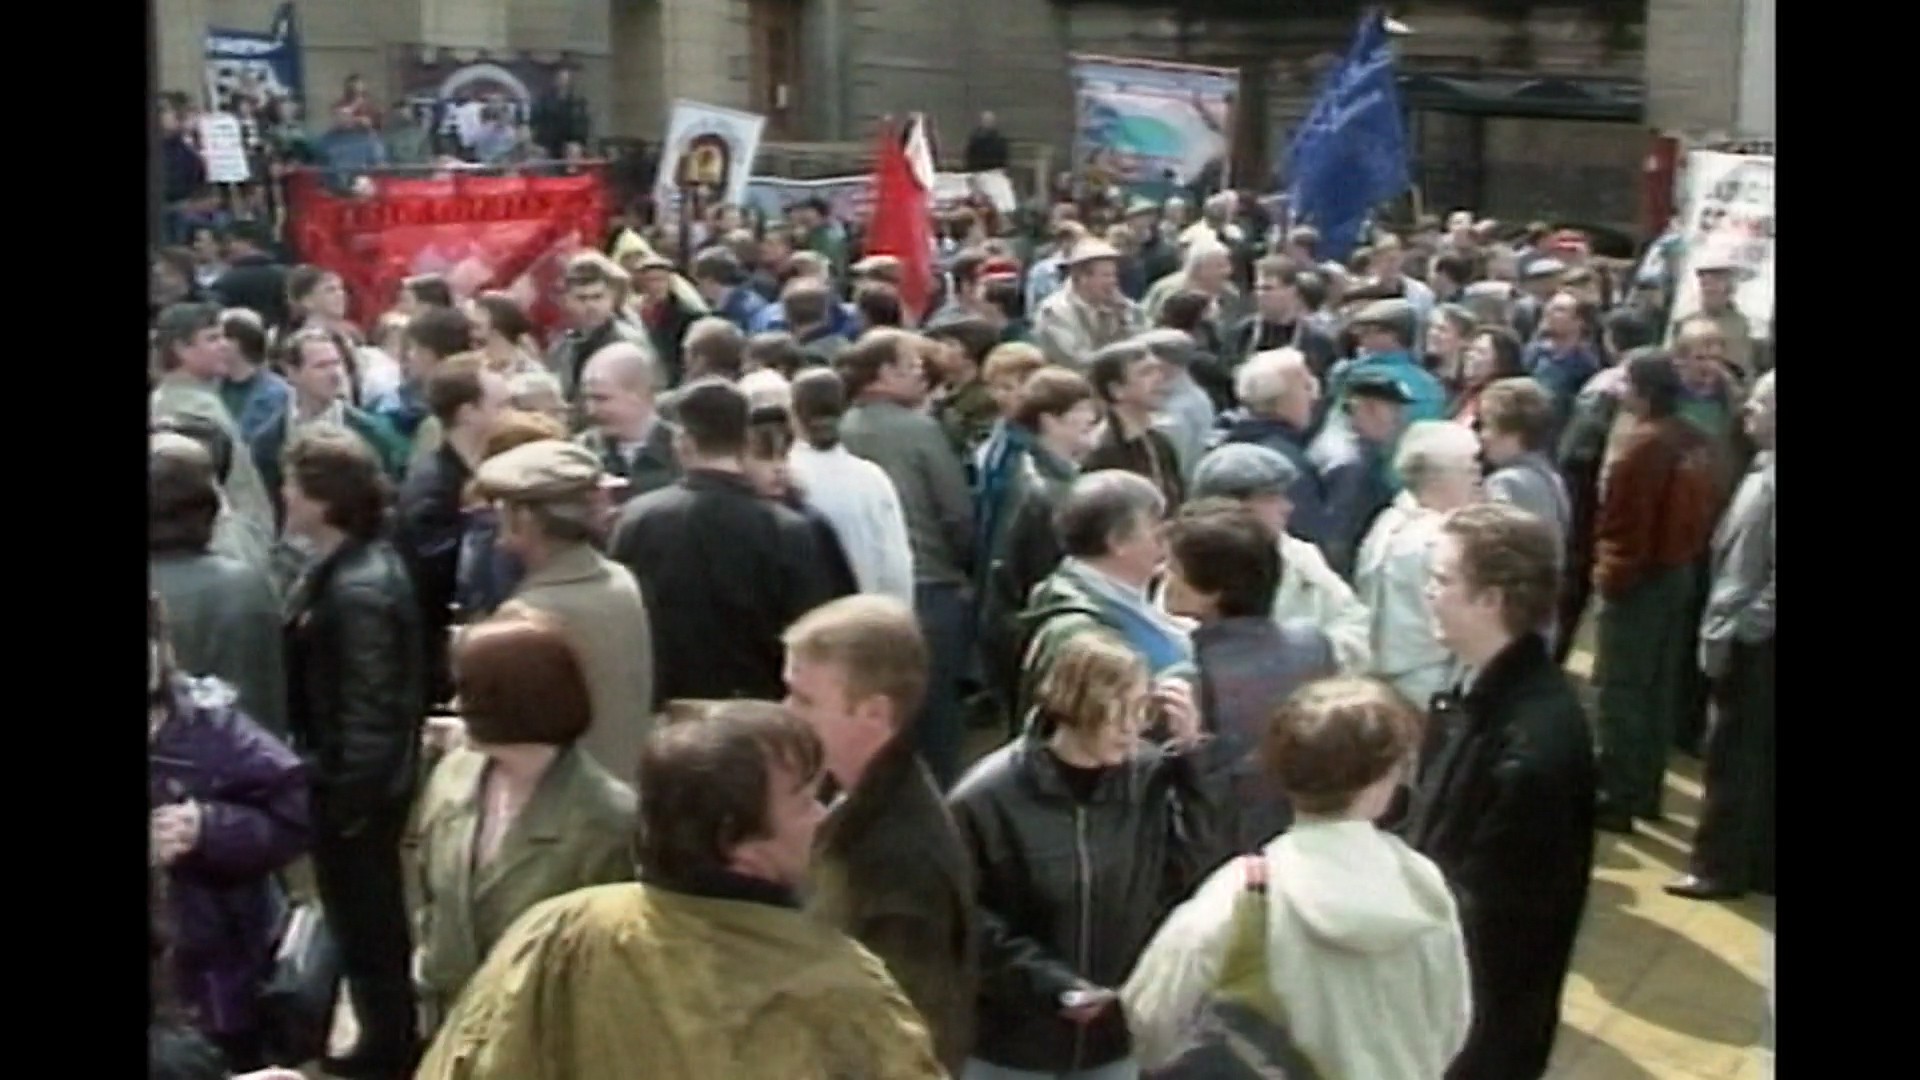 Sacked workers protest outside the factory.